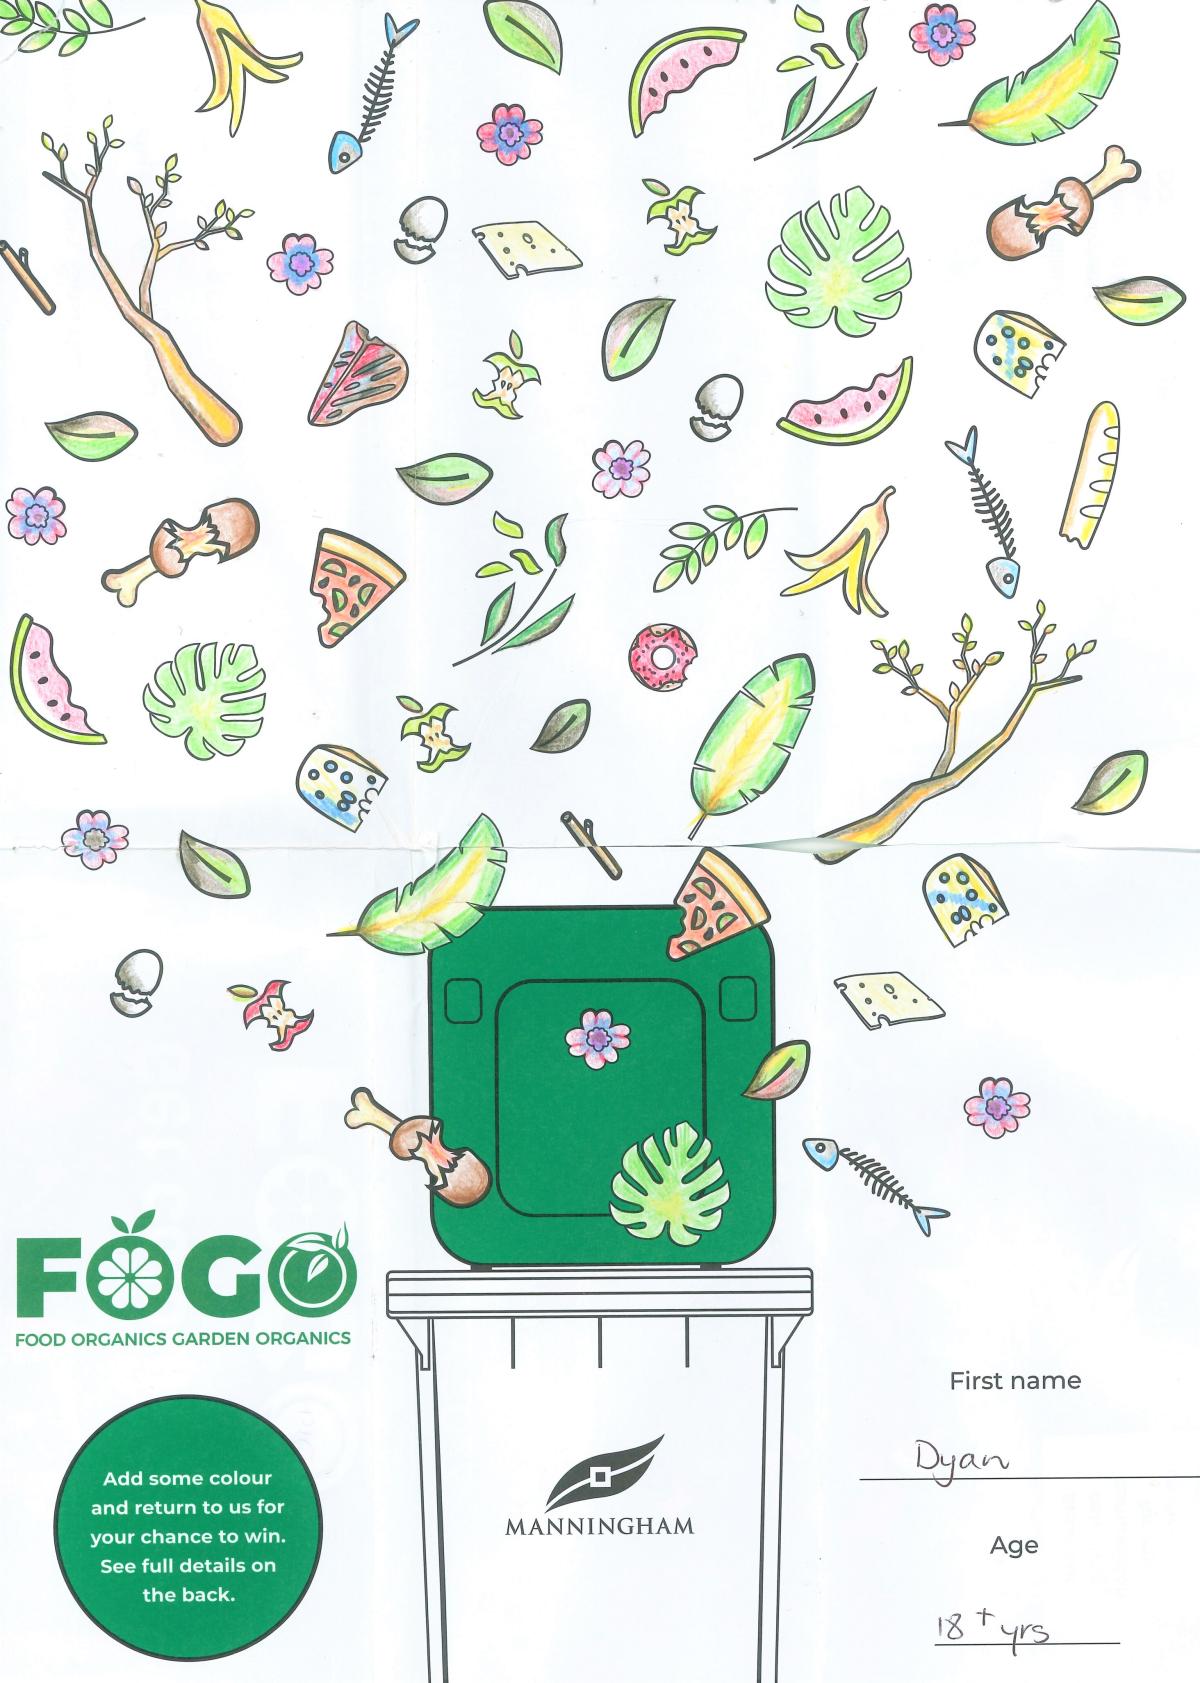 An image of a FOGO bin with all sorts of organic rubbish falling into it from above. The name 'Dyan' is in the bottom right corner.